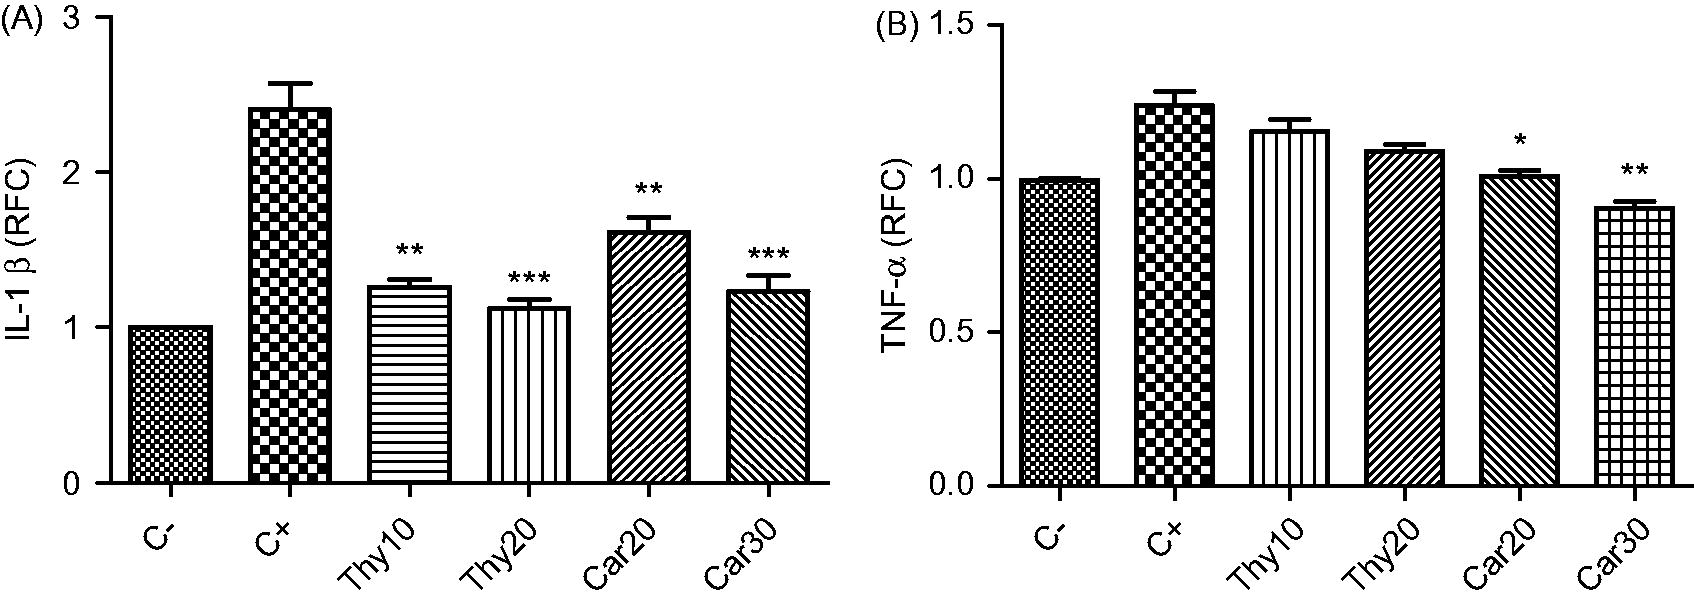 Figure 2. Effects of thymol and carvacrol on LPS-induced inflammatory gene expression. Cells were treated with thymol (Thy: 10 or 20 µg/ml) or carvacrol (Car: 20 or 30 µg/ml) in the presence of 1 µg LPS/ml for 24 h. Expression of IL-1β (A) and TNFα (B) was evaluated using real time-PCR. Negative control (C−) values were obtained in absence of LPS and compounds; positive controls (C+) were cells treated just with LPS. Values shown are mean ± SD of three independent experiments in triplicate. *p < 0.05, **p < 0.01, ***p < 0.001 versus positive control. RFC, relative fold-change.